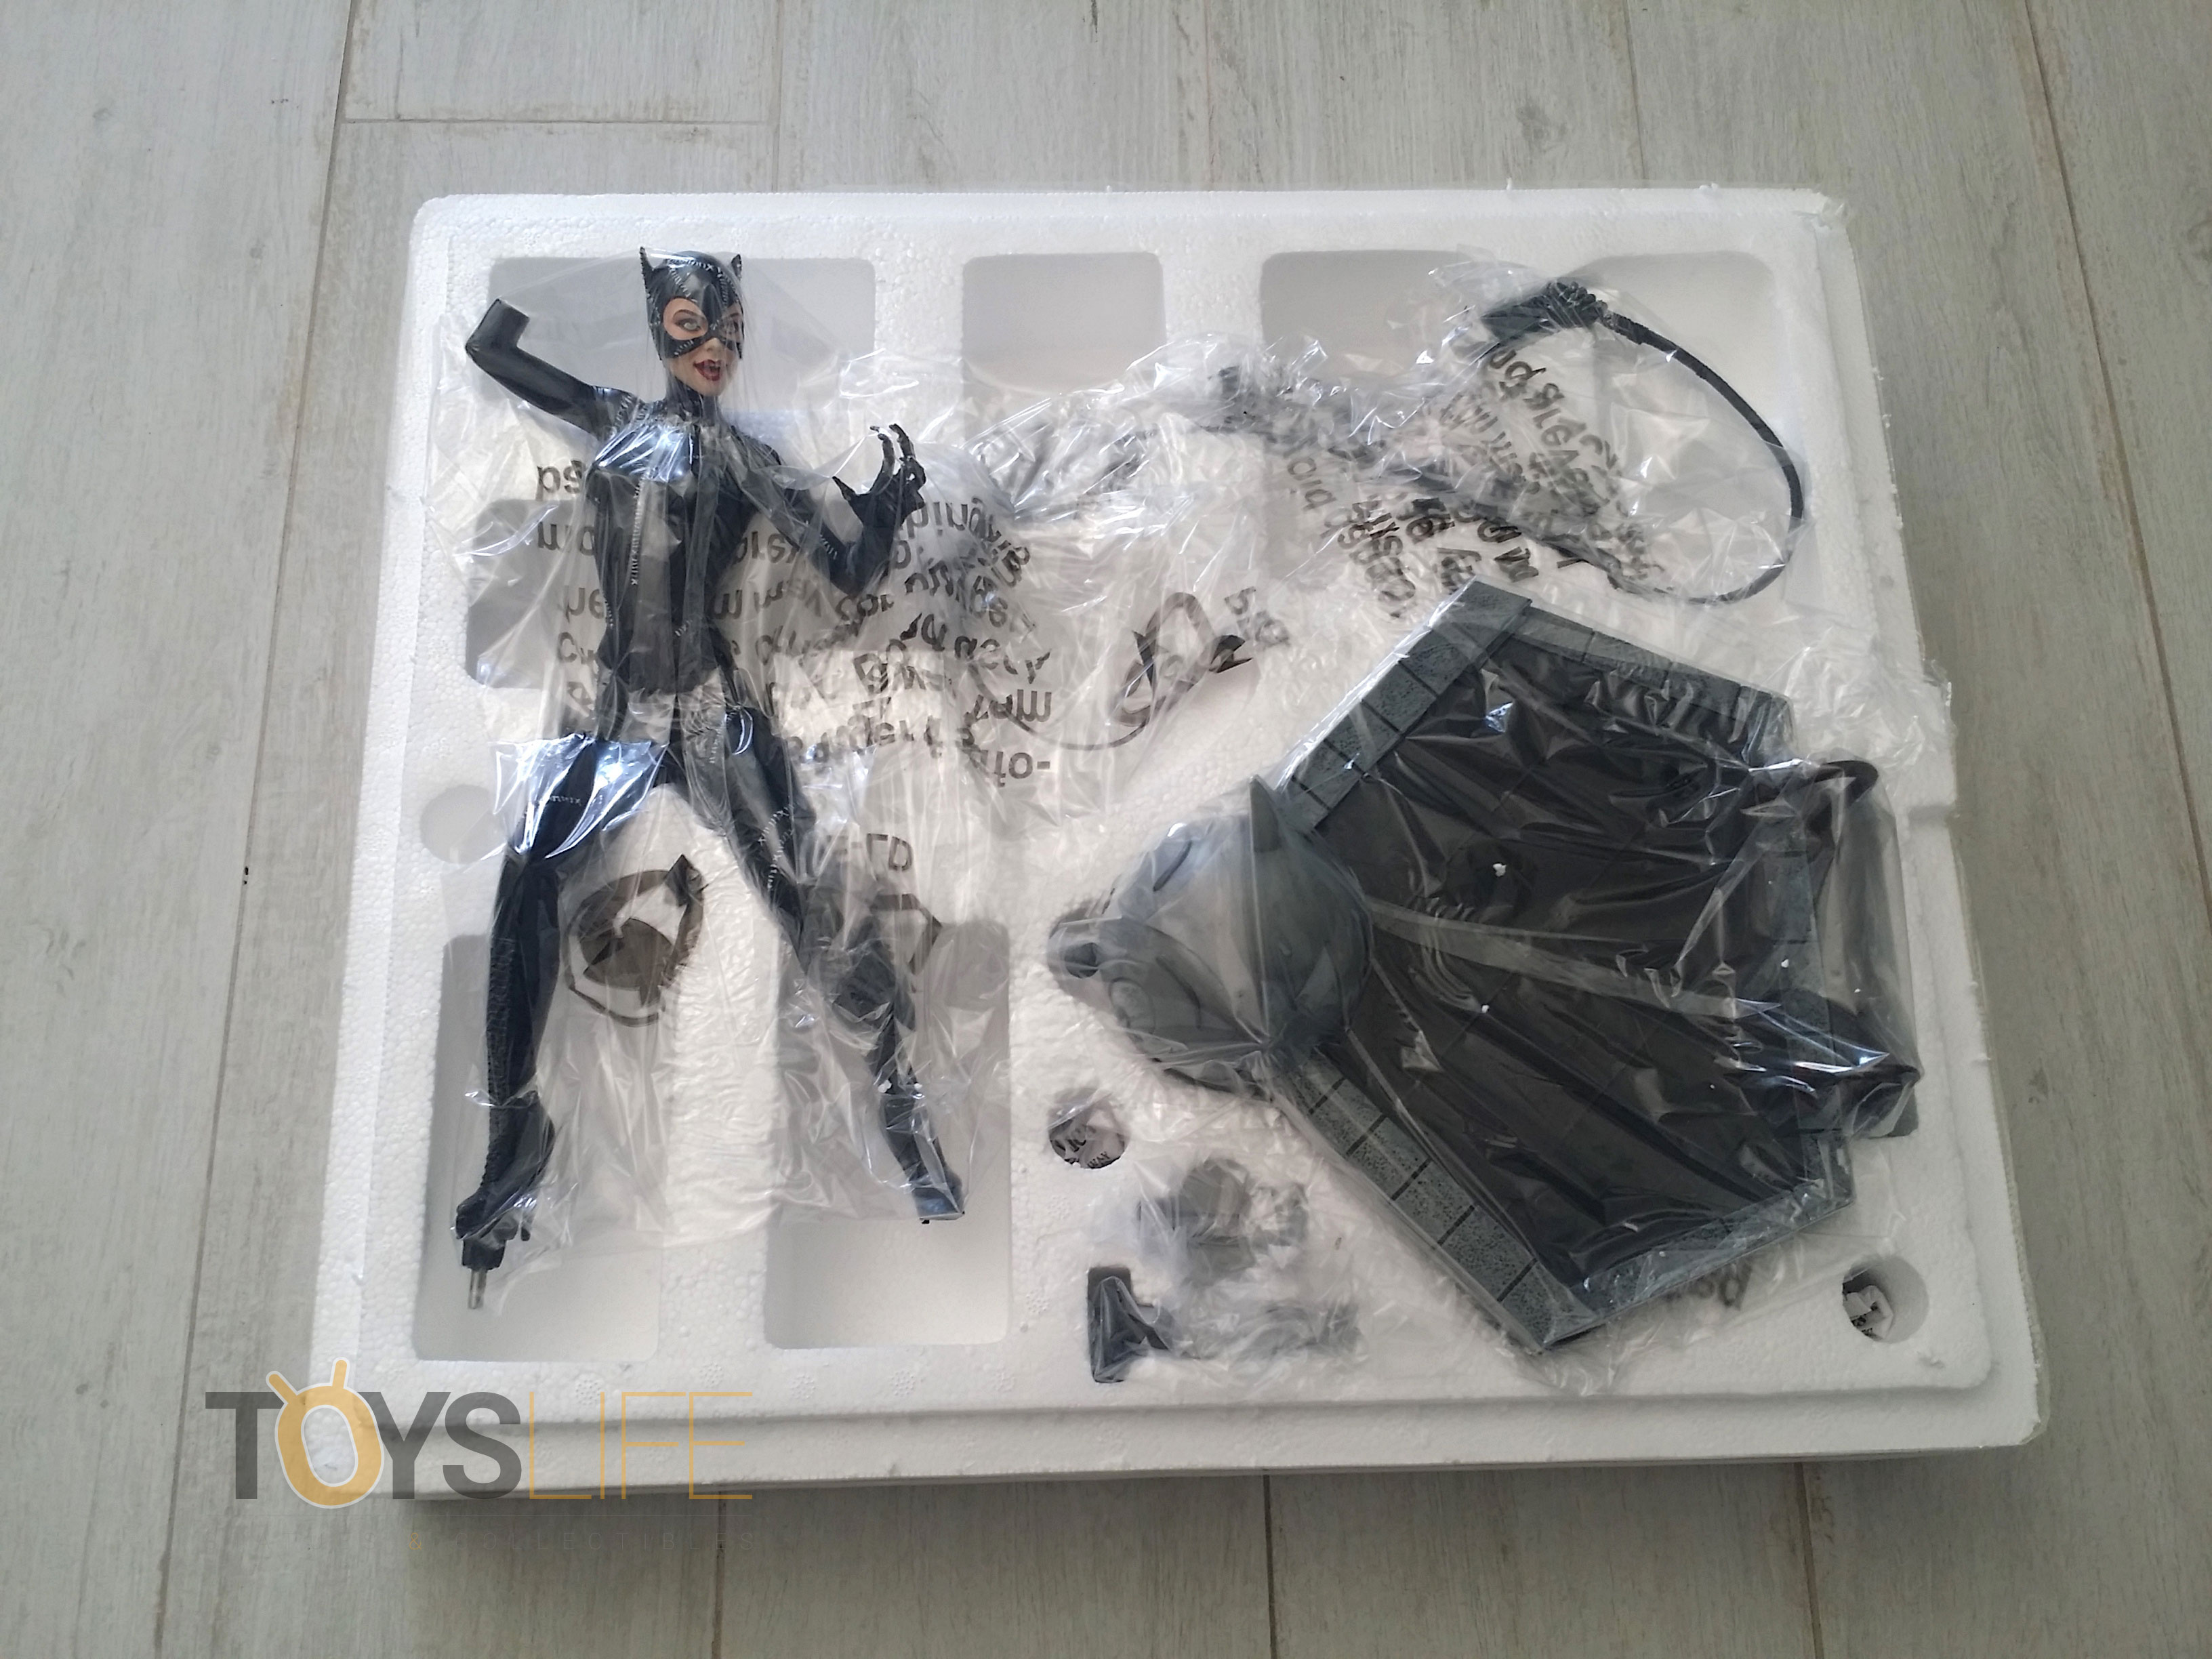 tweeterhead-catwoman-michelle-pfeiffer-maquette-toyslife-review-04